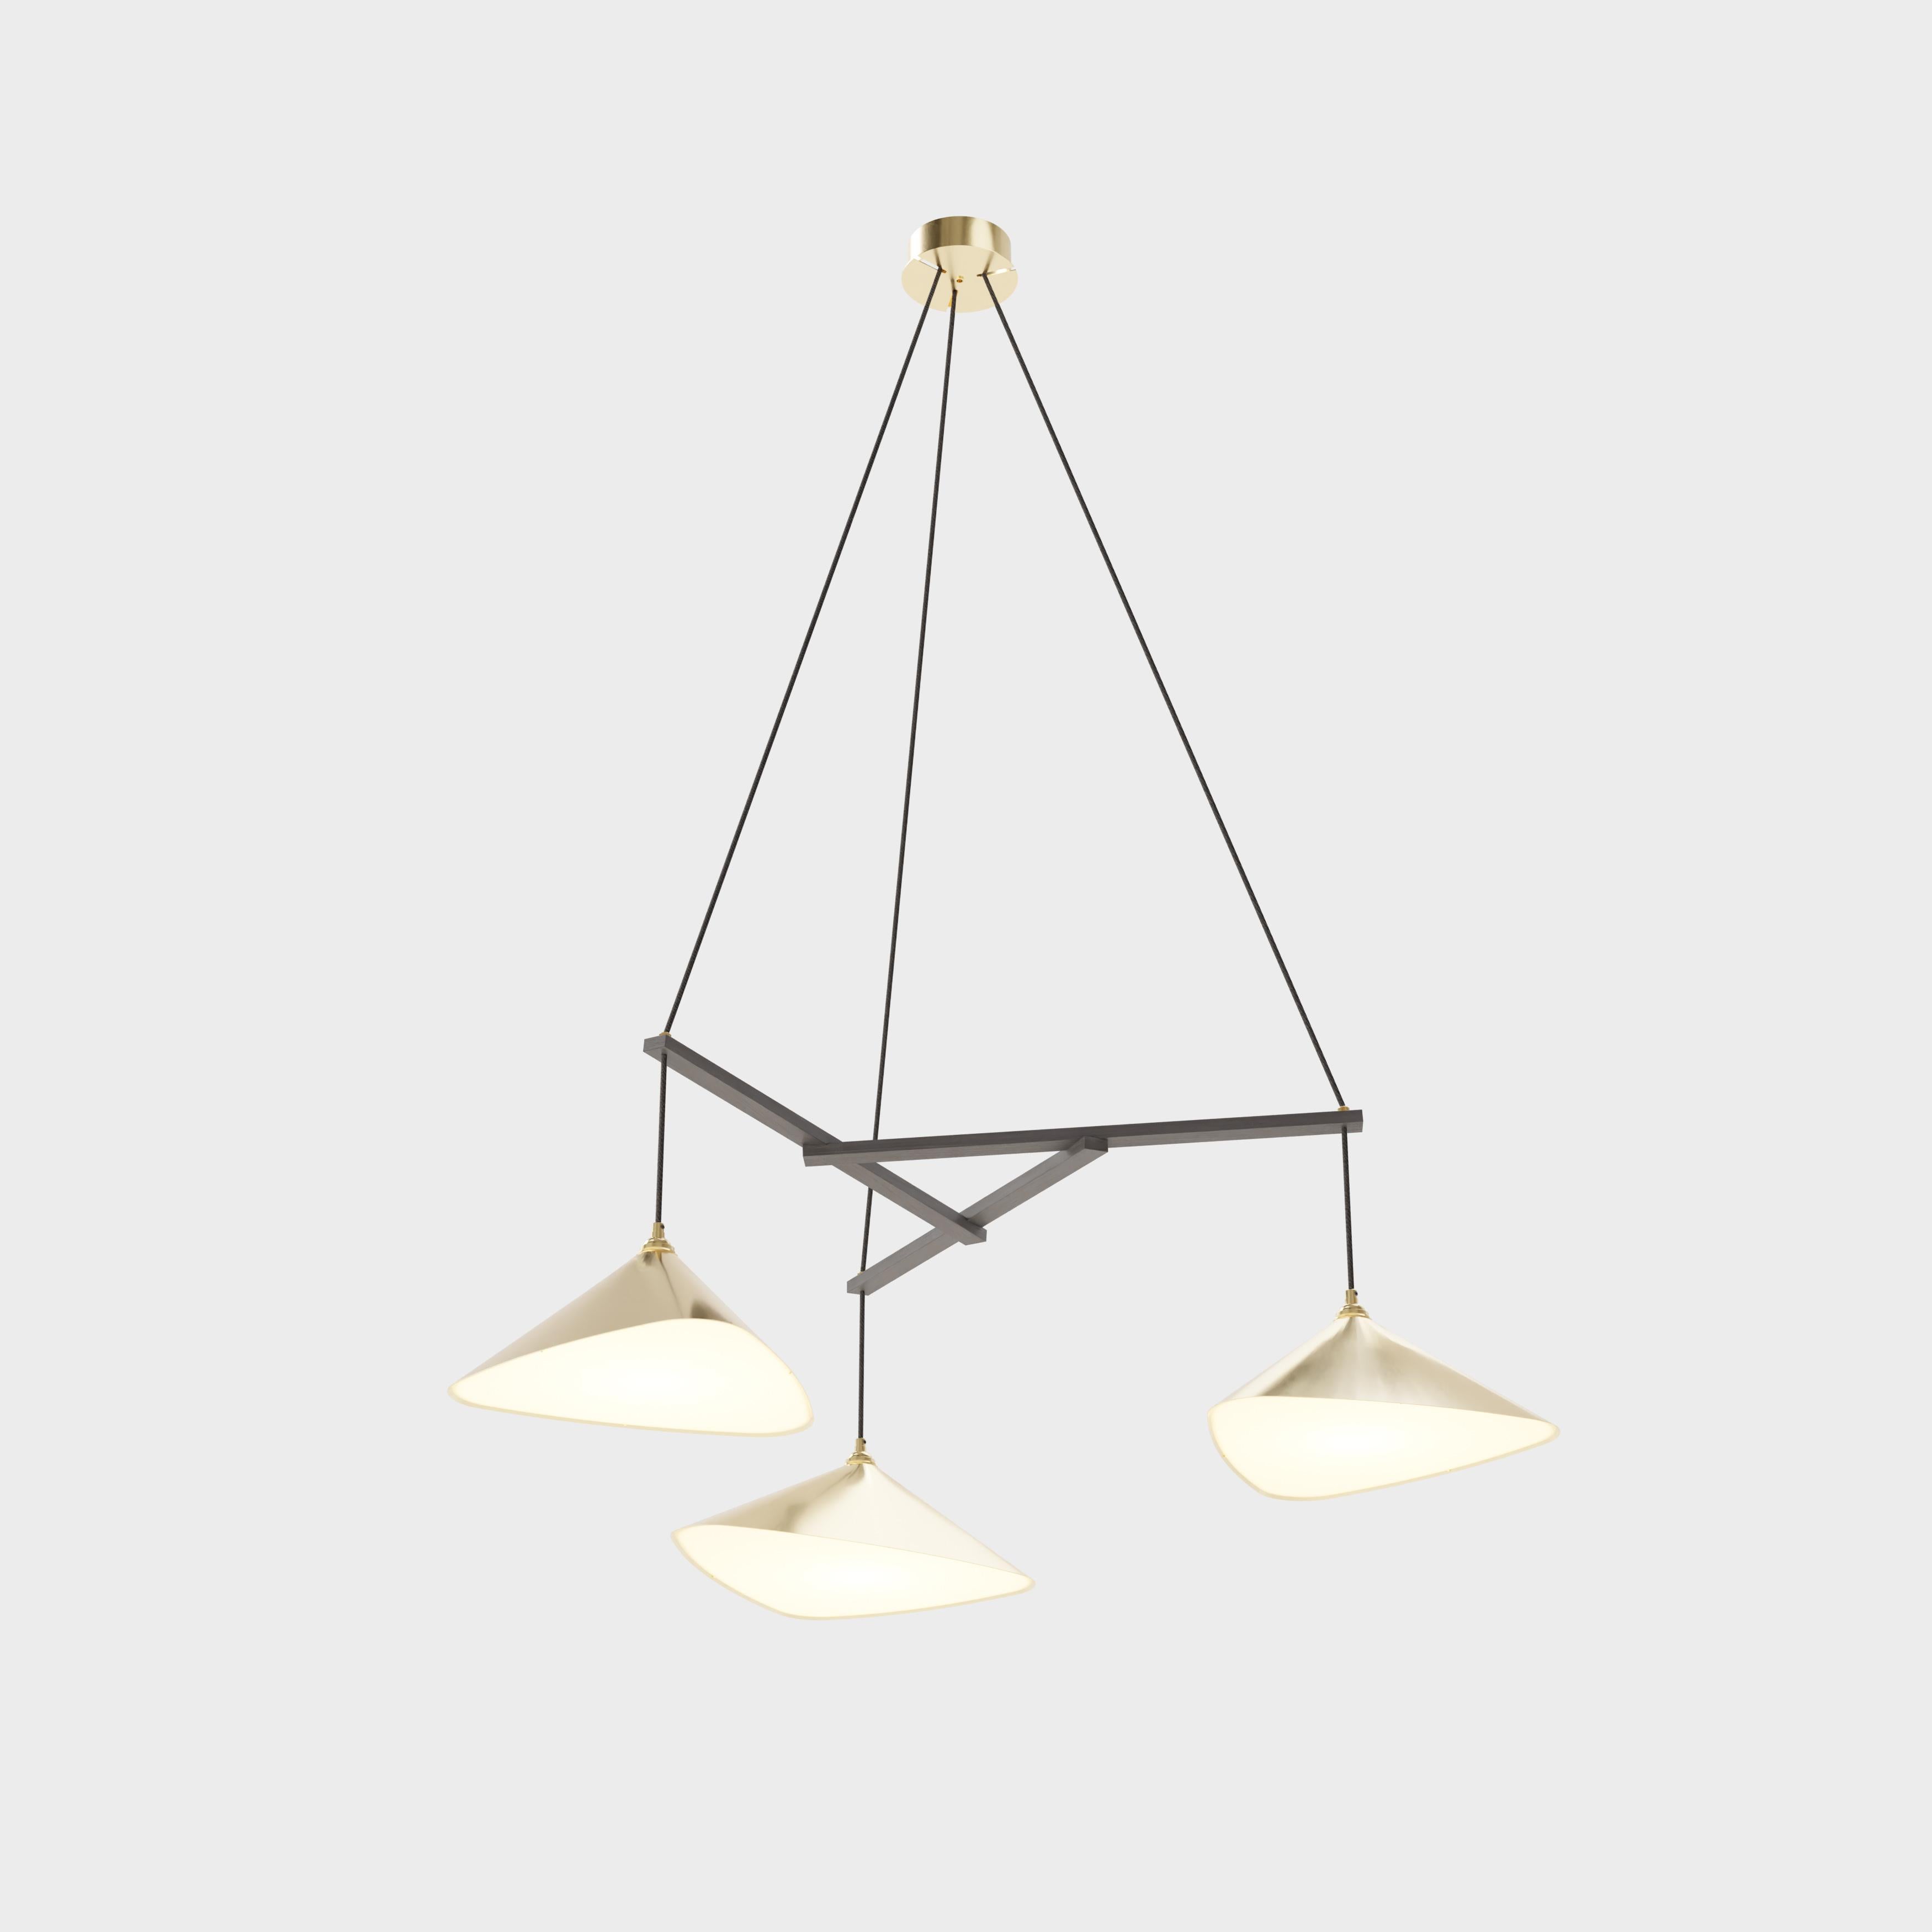 German Daniel Becker 'Emily 3' Chandelier in Brass with Black Frame for Moss Objects For Sale